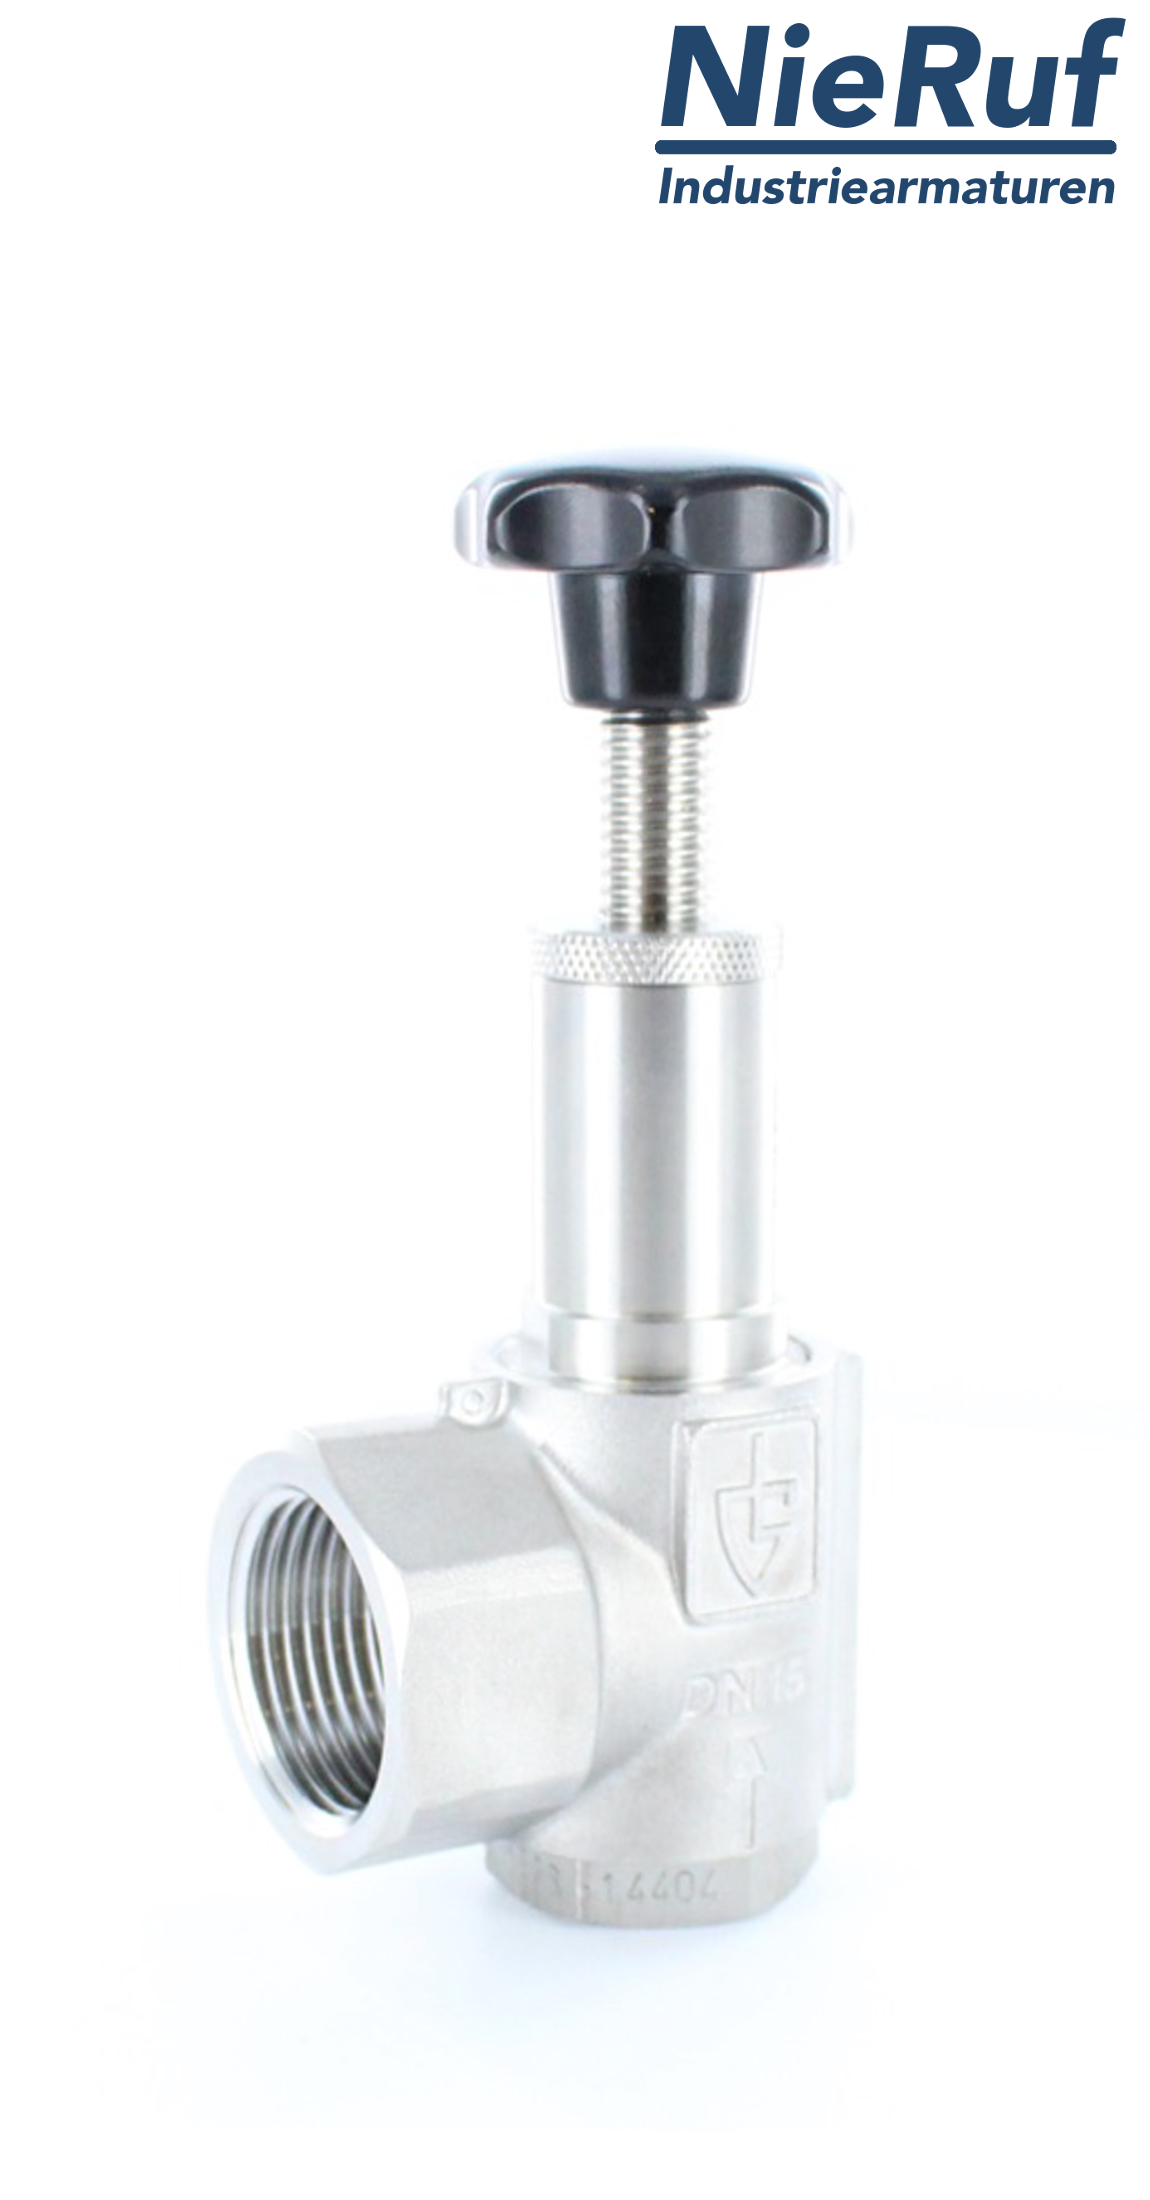 angle-type overflow valve 3/4" inch fm UV15 stainless steel 1,6 - 2,8 bar